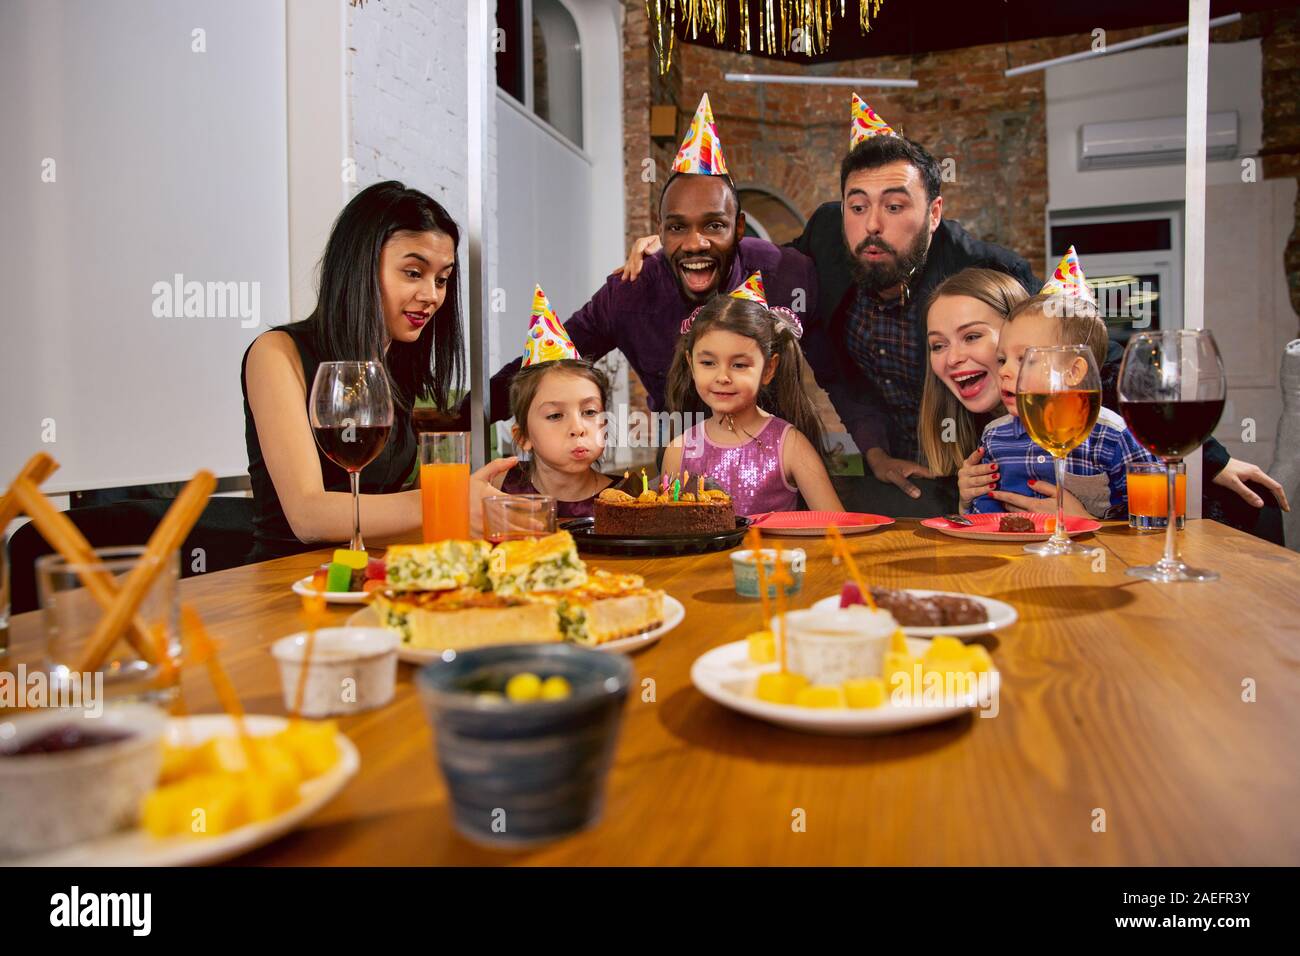 Portrait of happy multiethnic family celebrating a birthday at home. Big family eating snacks and drinking wine while greeting and having fun children. Celebration, family, party, home concept. Stock Photo